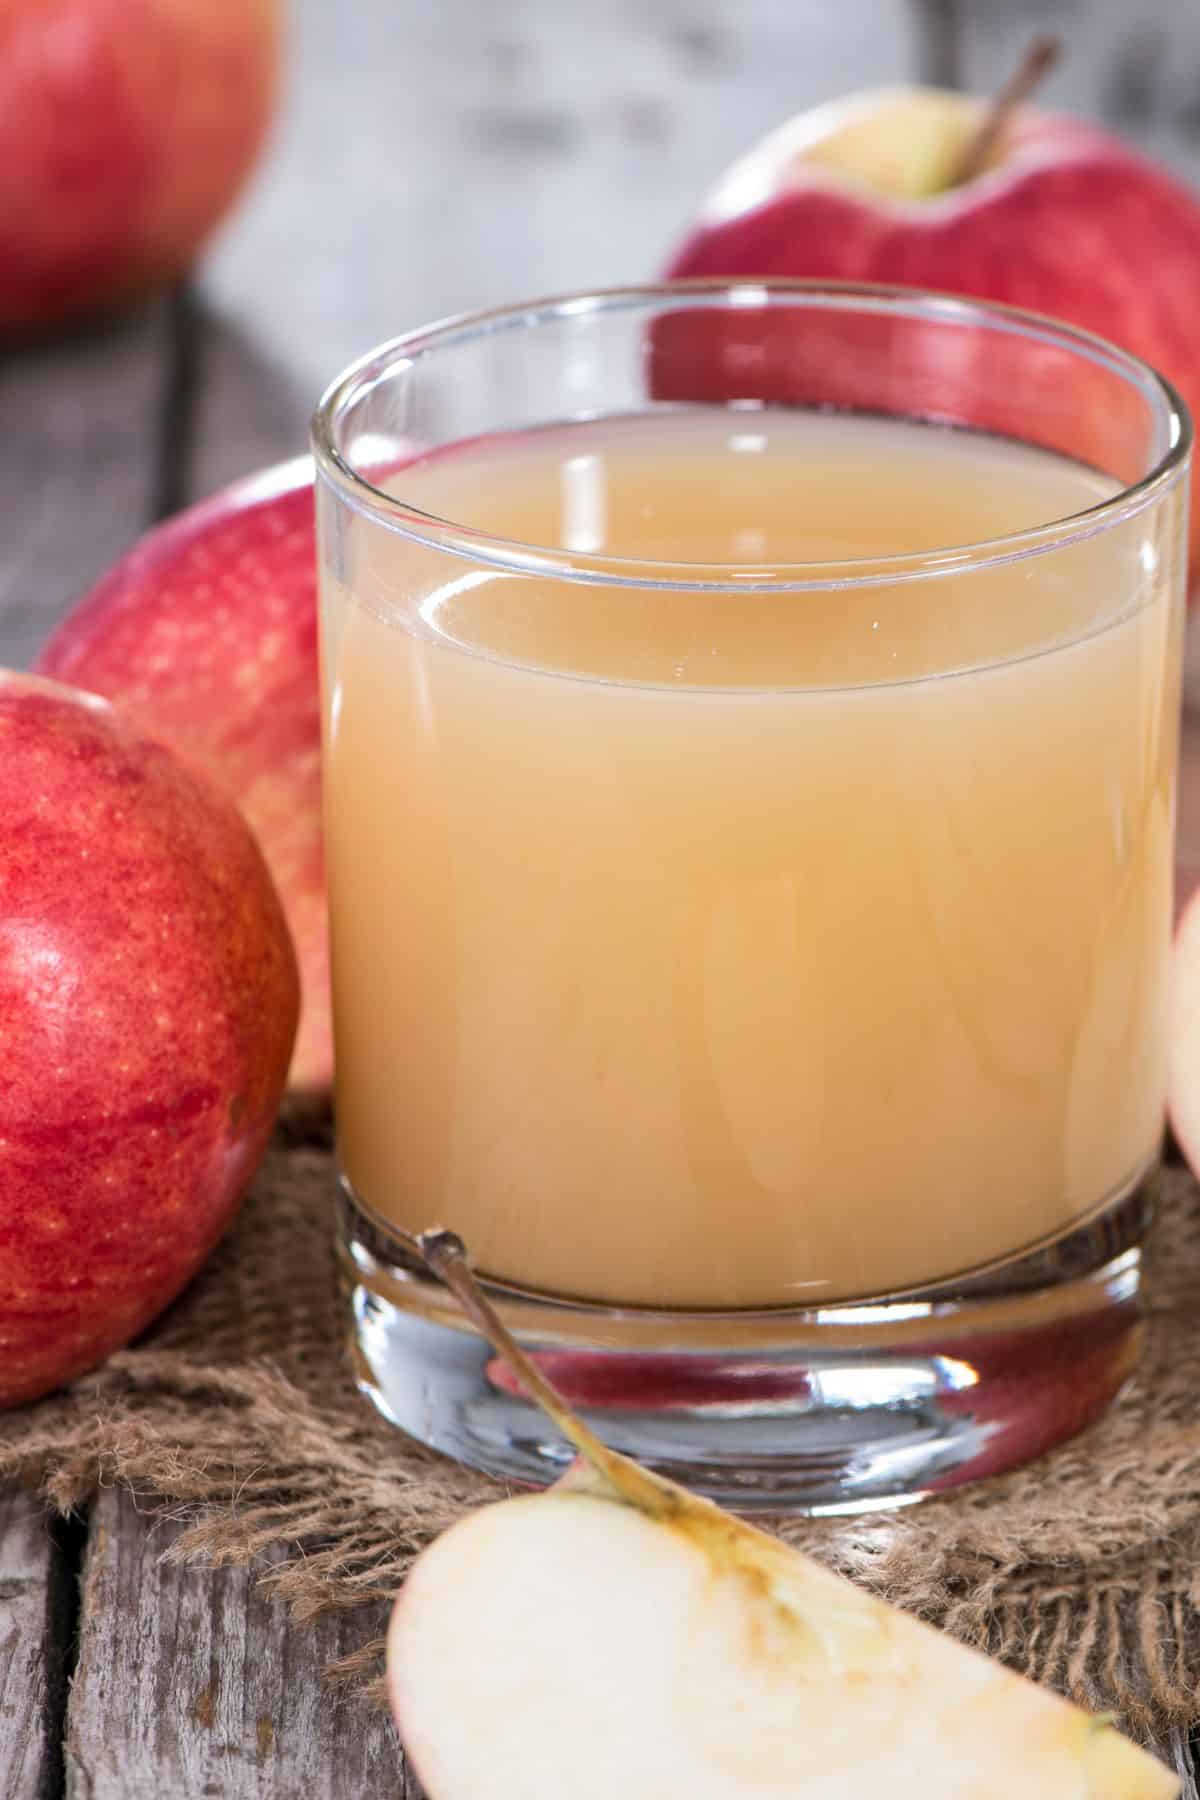 A short glass of apple cider next to fresh whole apples.